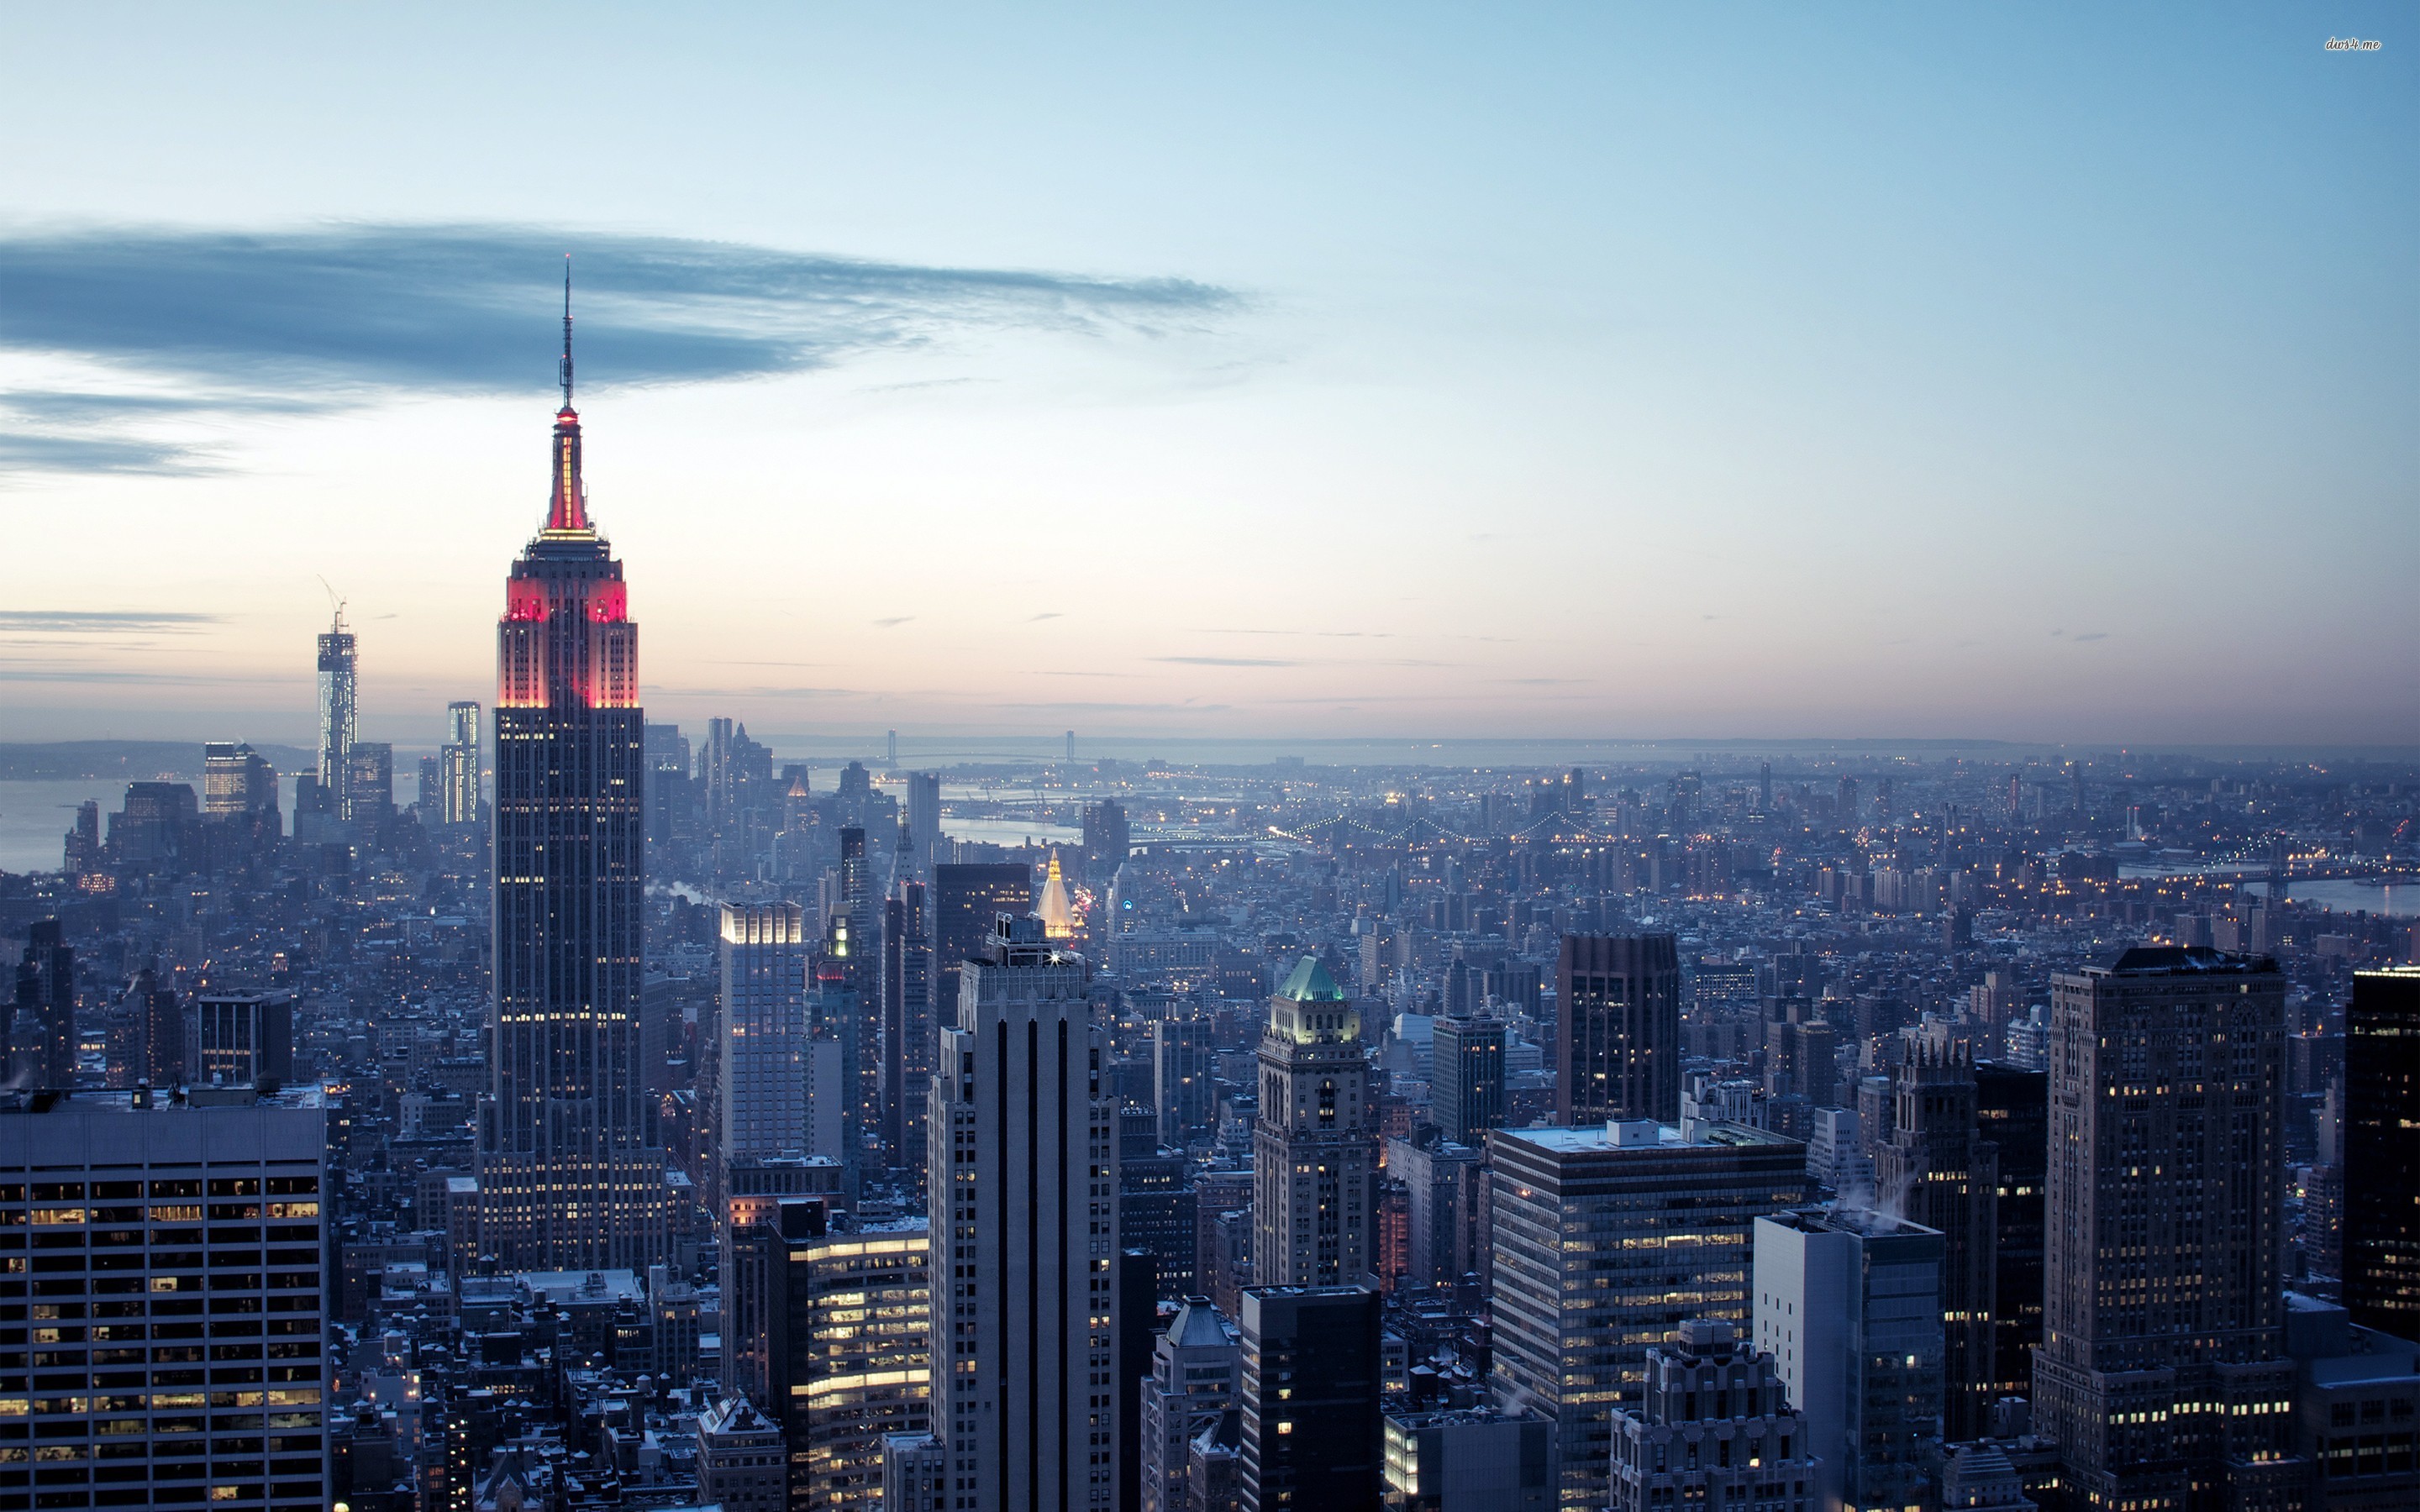 Empire State Building Wallpaper Full HD 85mhh7c 4usky